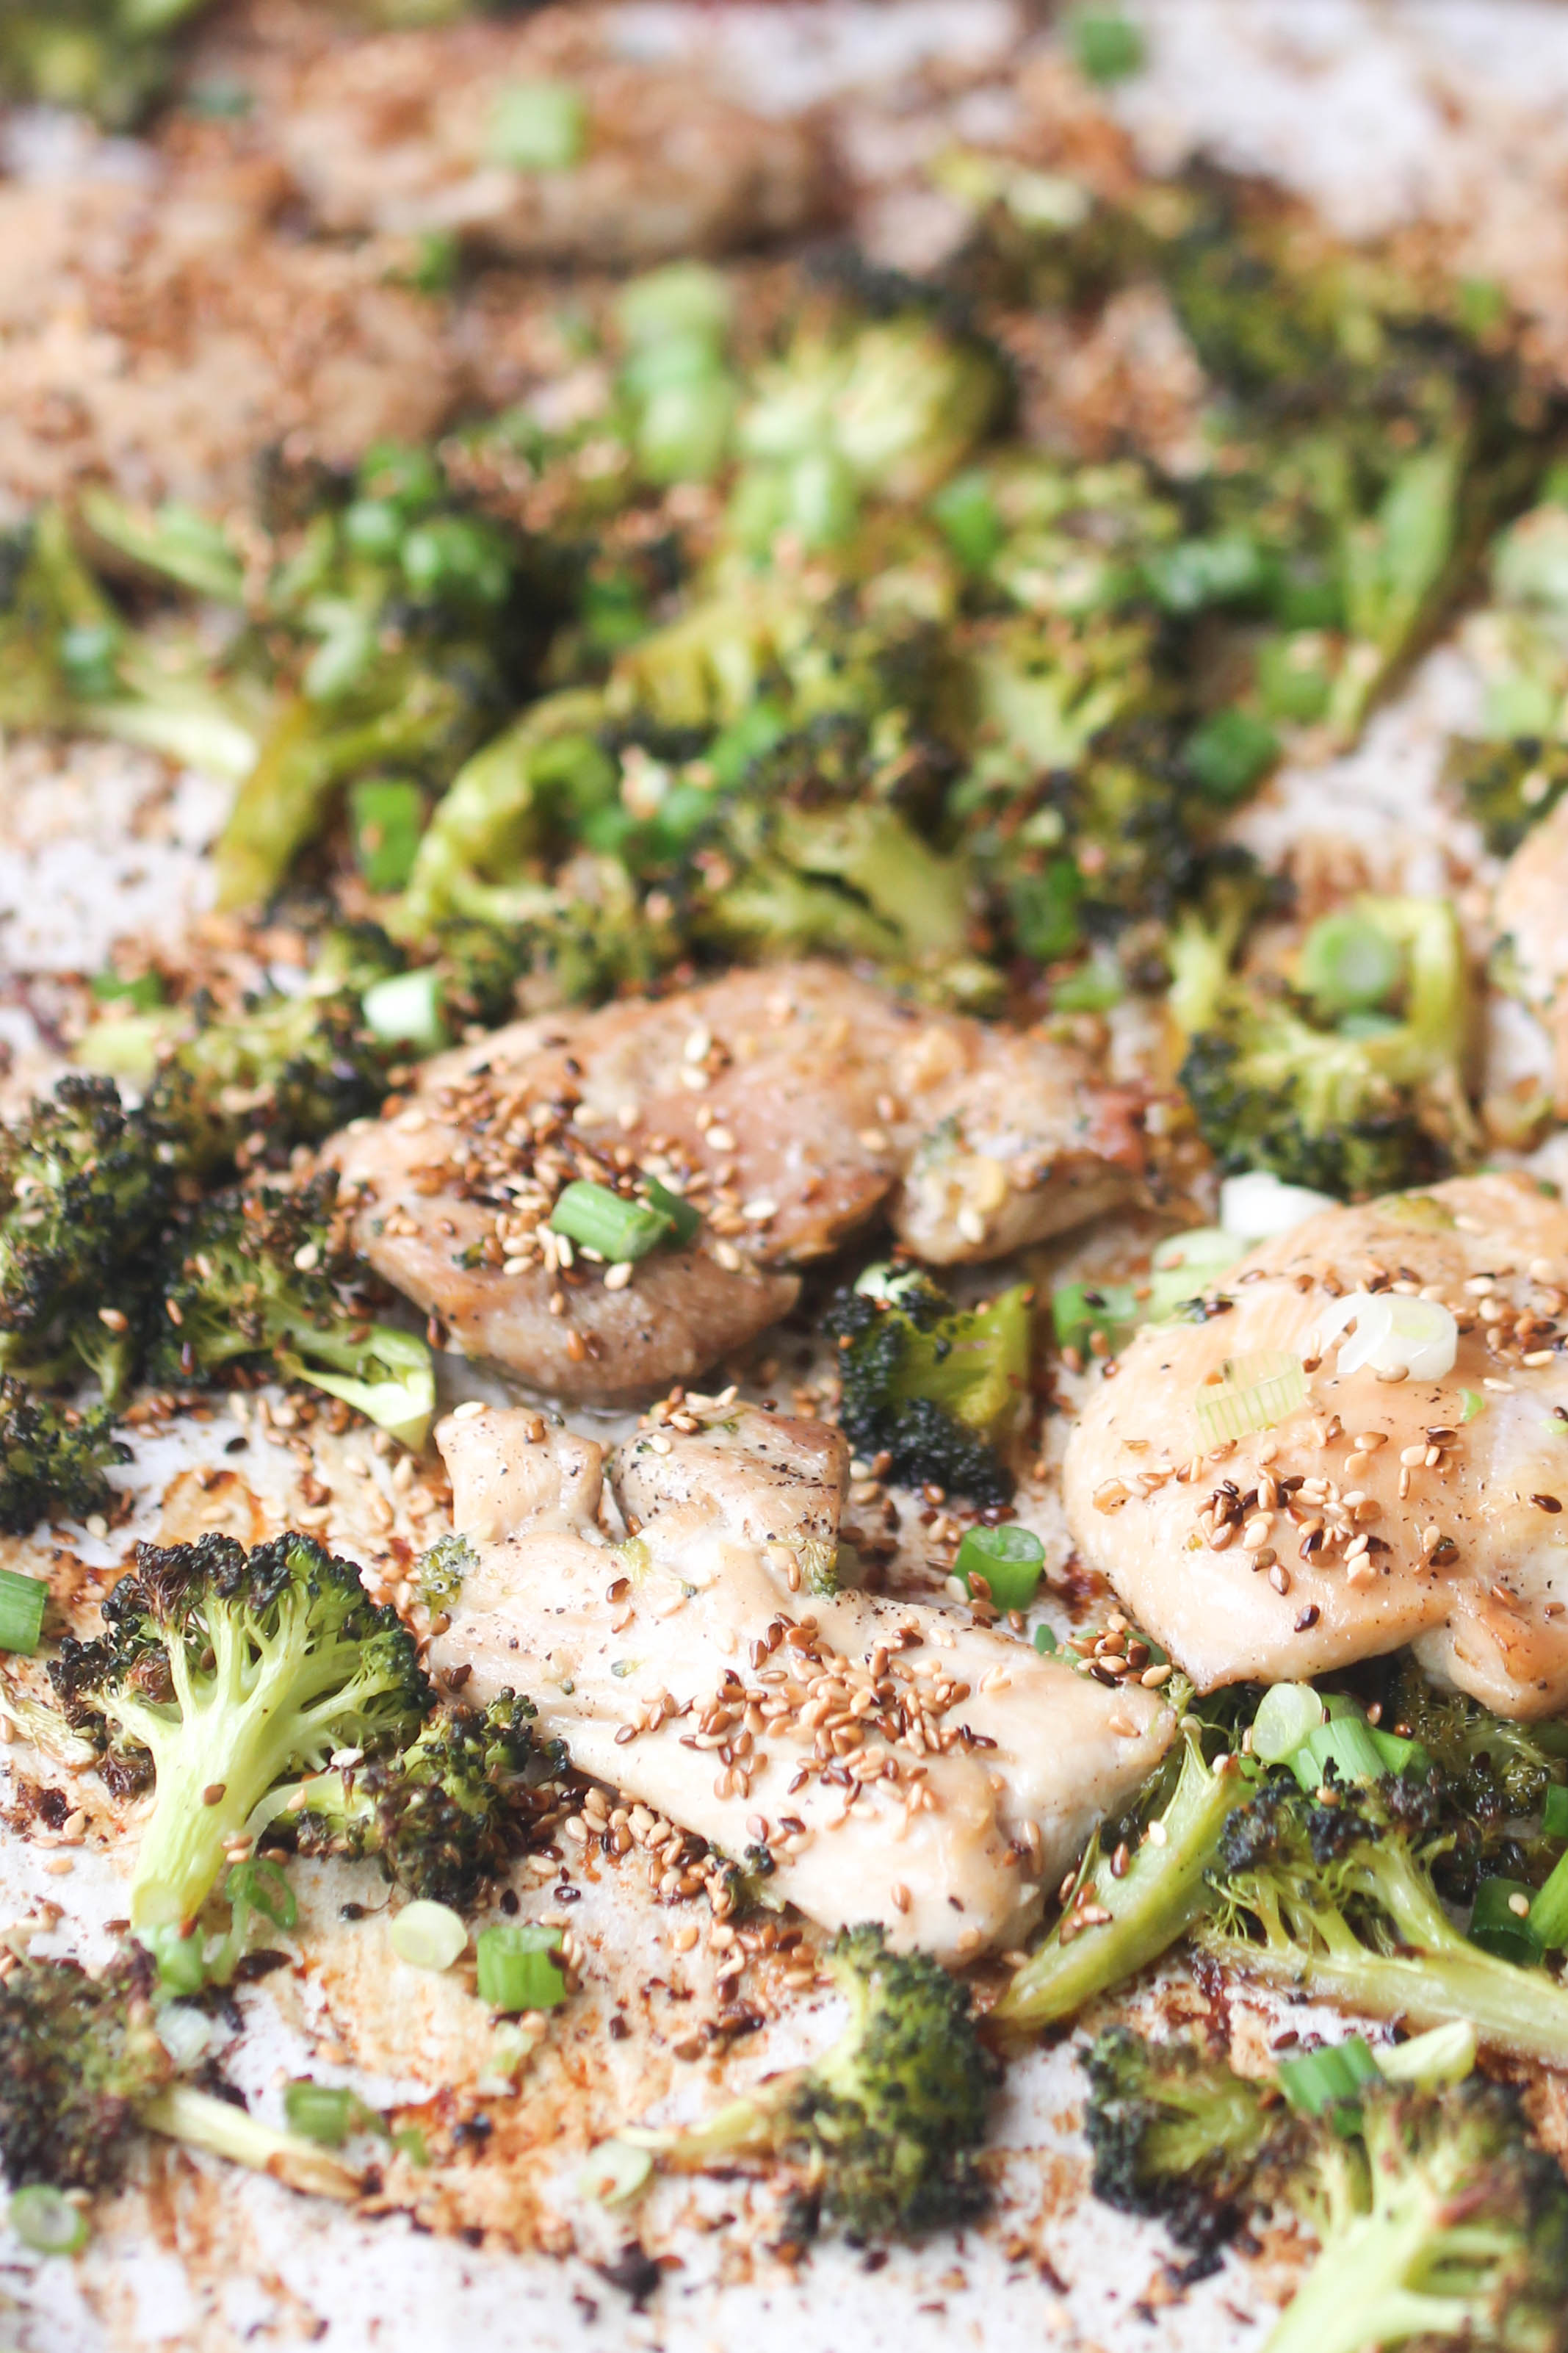 Sheet Pan Chicken and Broccoli is a perfect weeknight meal for the whole family. It uses minimal ingredients, little prep time, and requires no cleaning! `Sheet Pan Chicken and Broccoli is a perfect weeknight meal for the whole family. It uses minim…